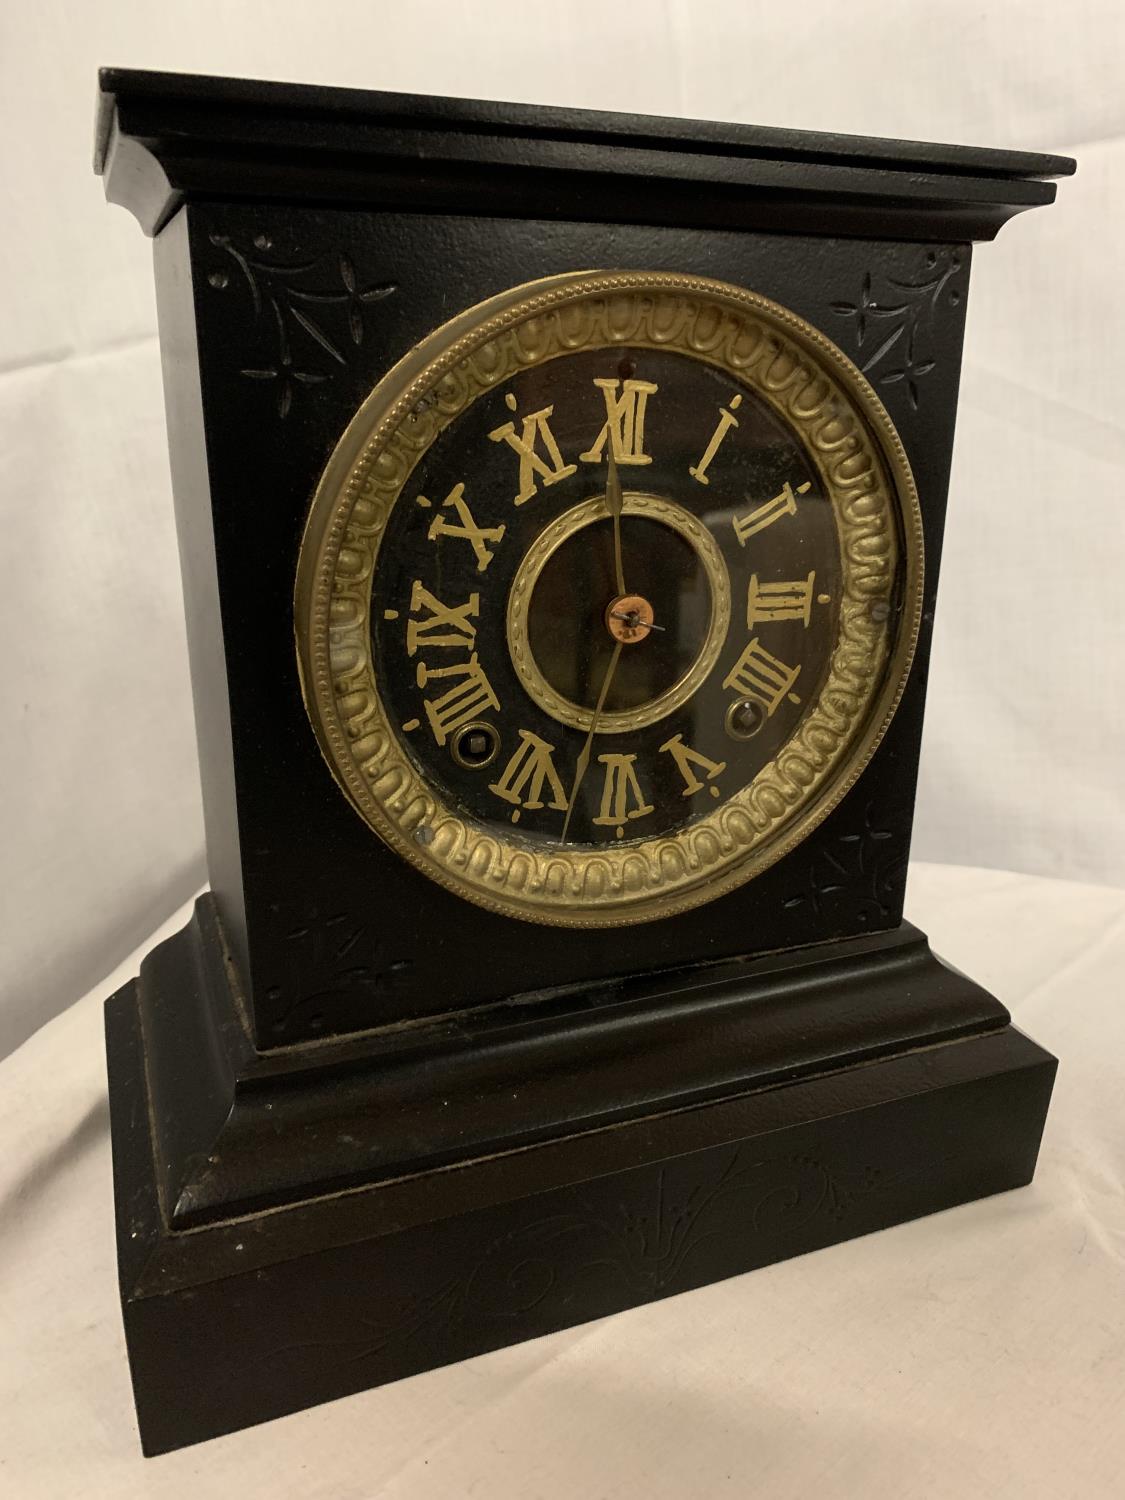 A HEAVY BLACK METAL MANTLE CLOCK WITH GILT ROMAN NUMERALS AND FACE SURROUND - Image 3 of 4